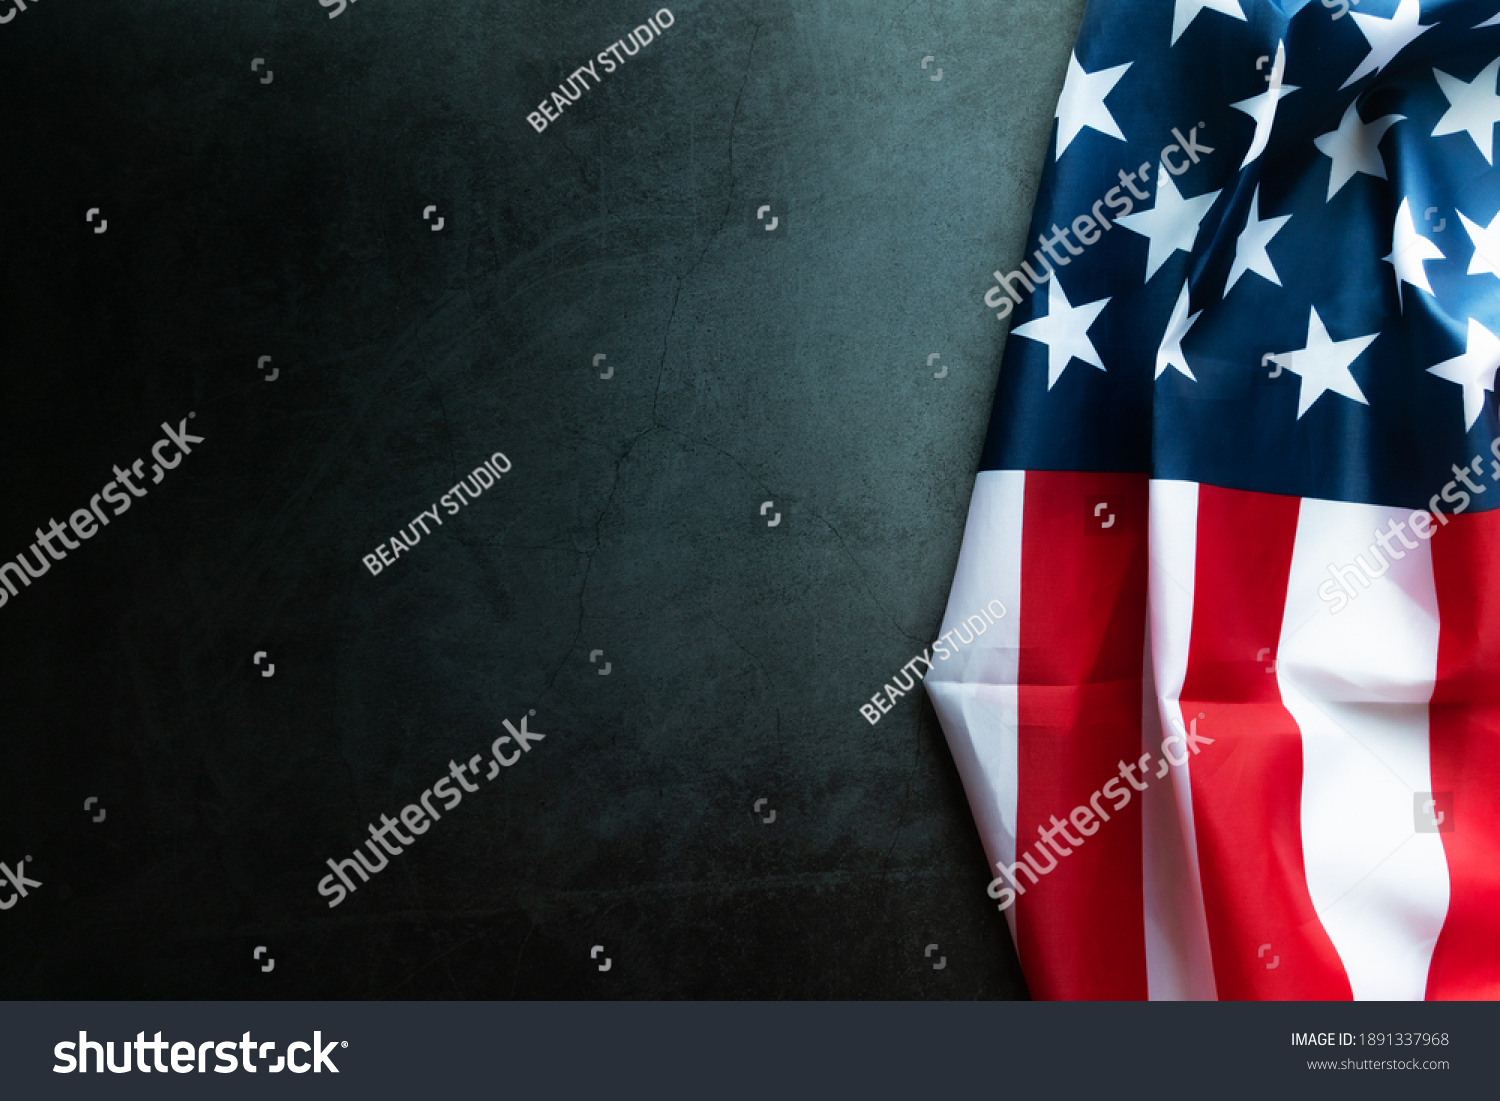 Martin Luther King Day Anniversary - American flag on abstract background #1891337968